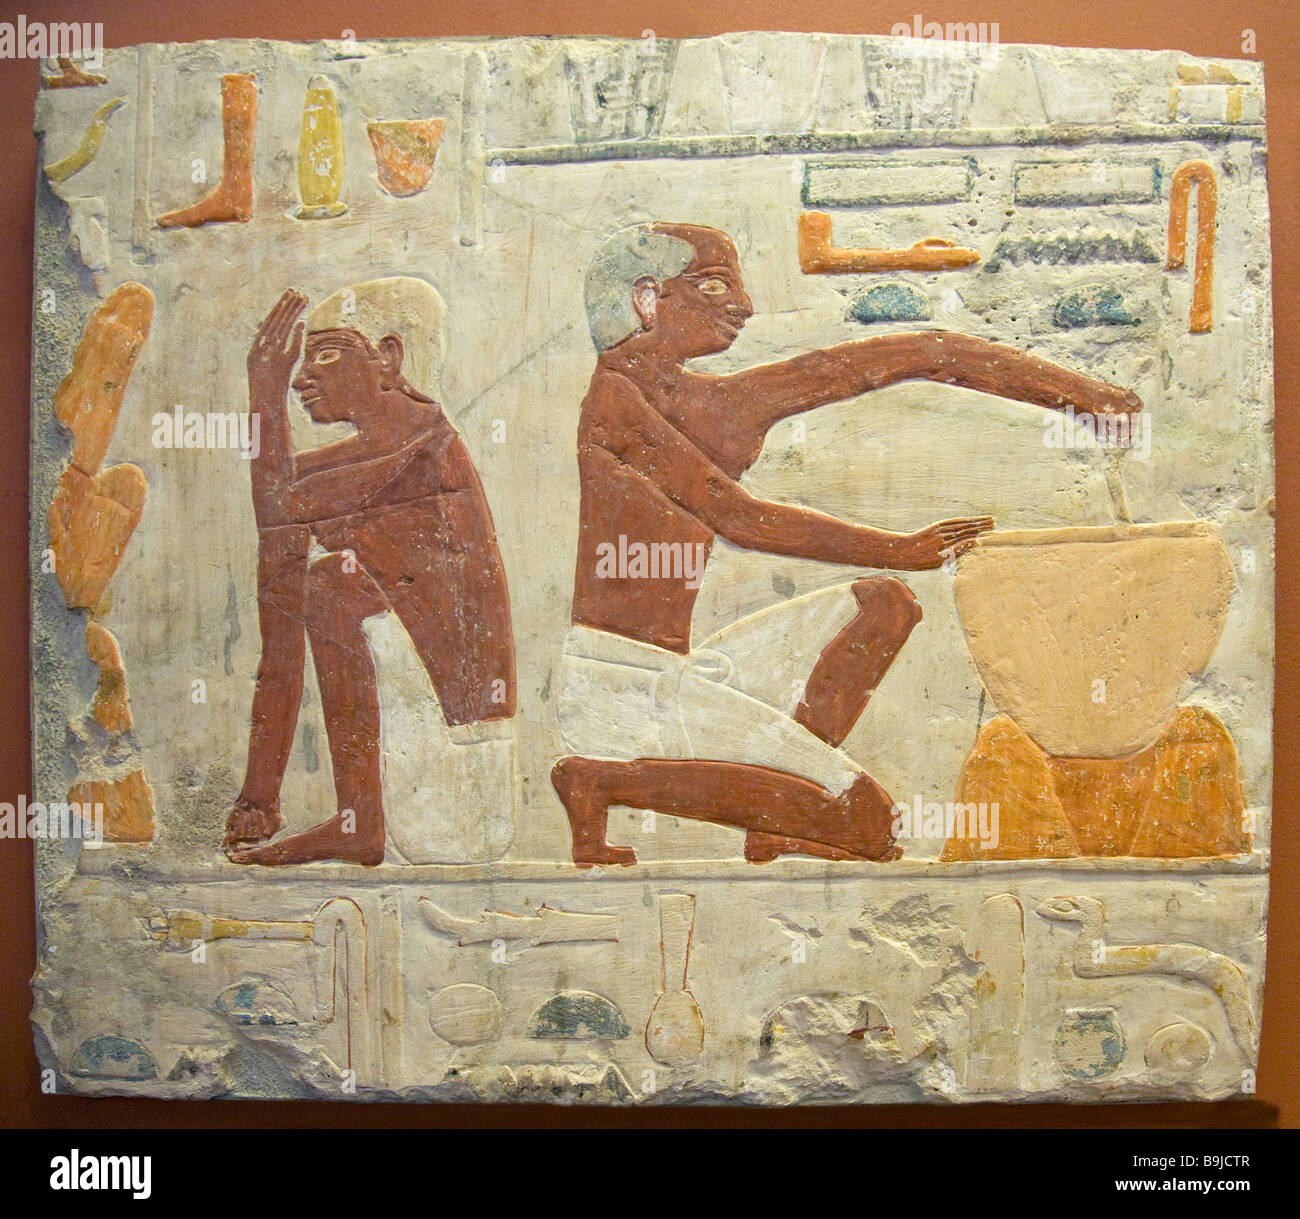 Cooking and making bread ancient egyptian painted freeze Musee du Louvre Museum Paris France Europe Stock Photo